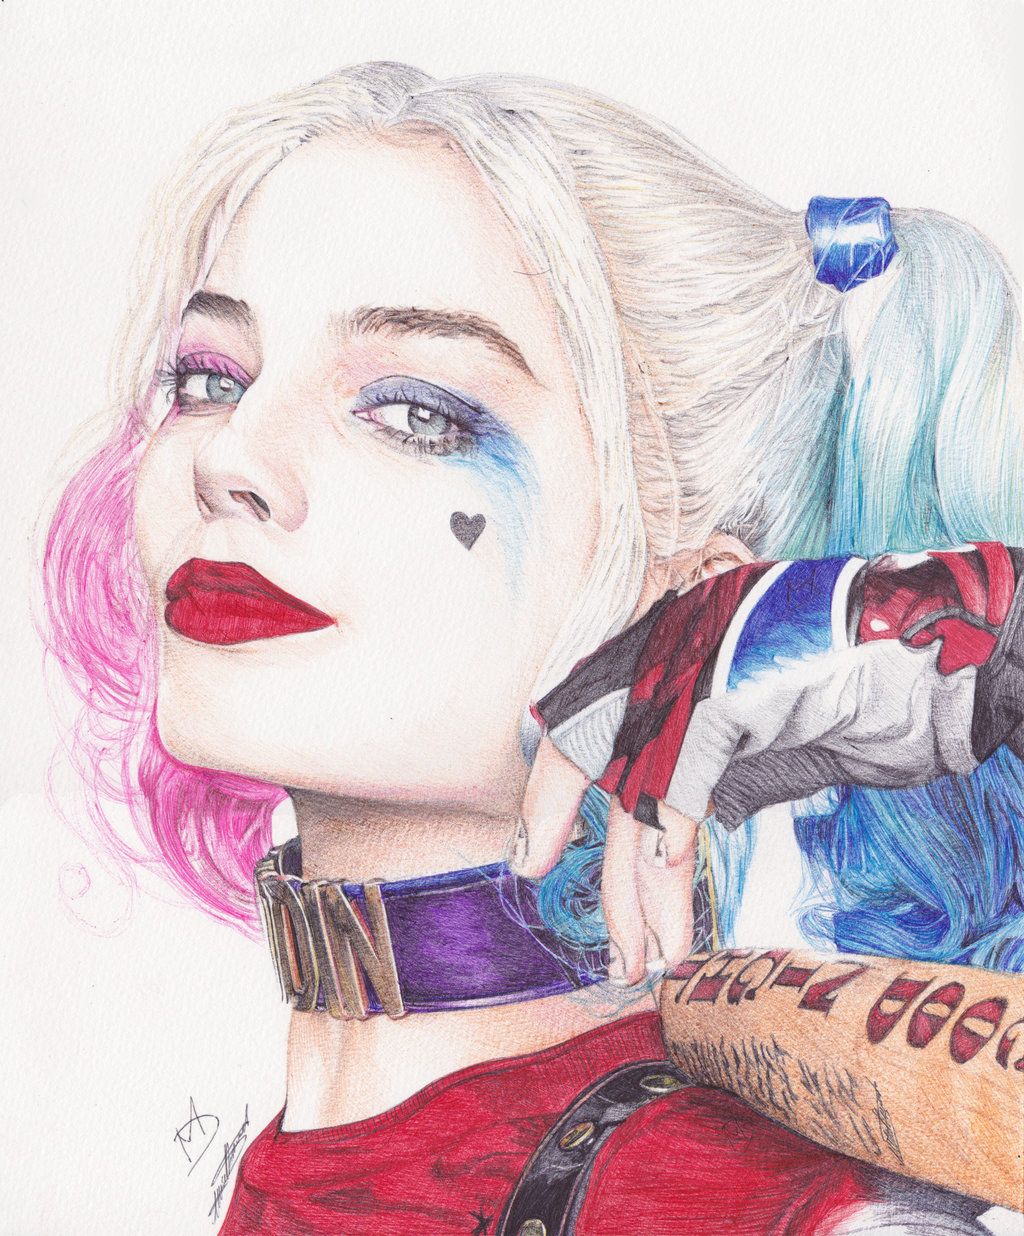 Harley Quinn Drawing, Pencil, Sketch, Colorful, Realistic Art Image.